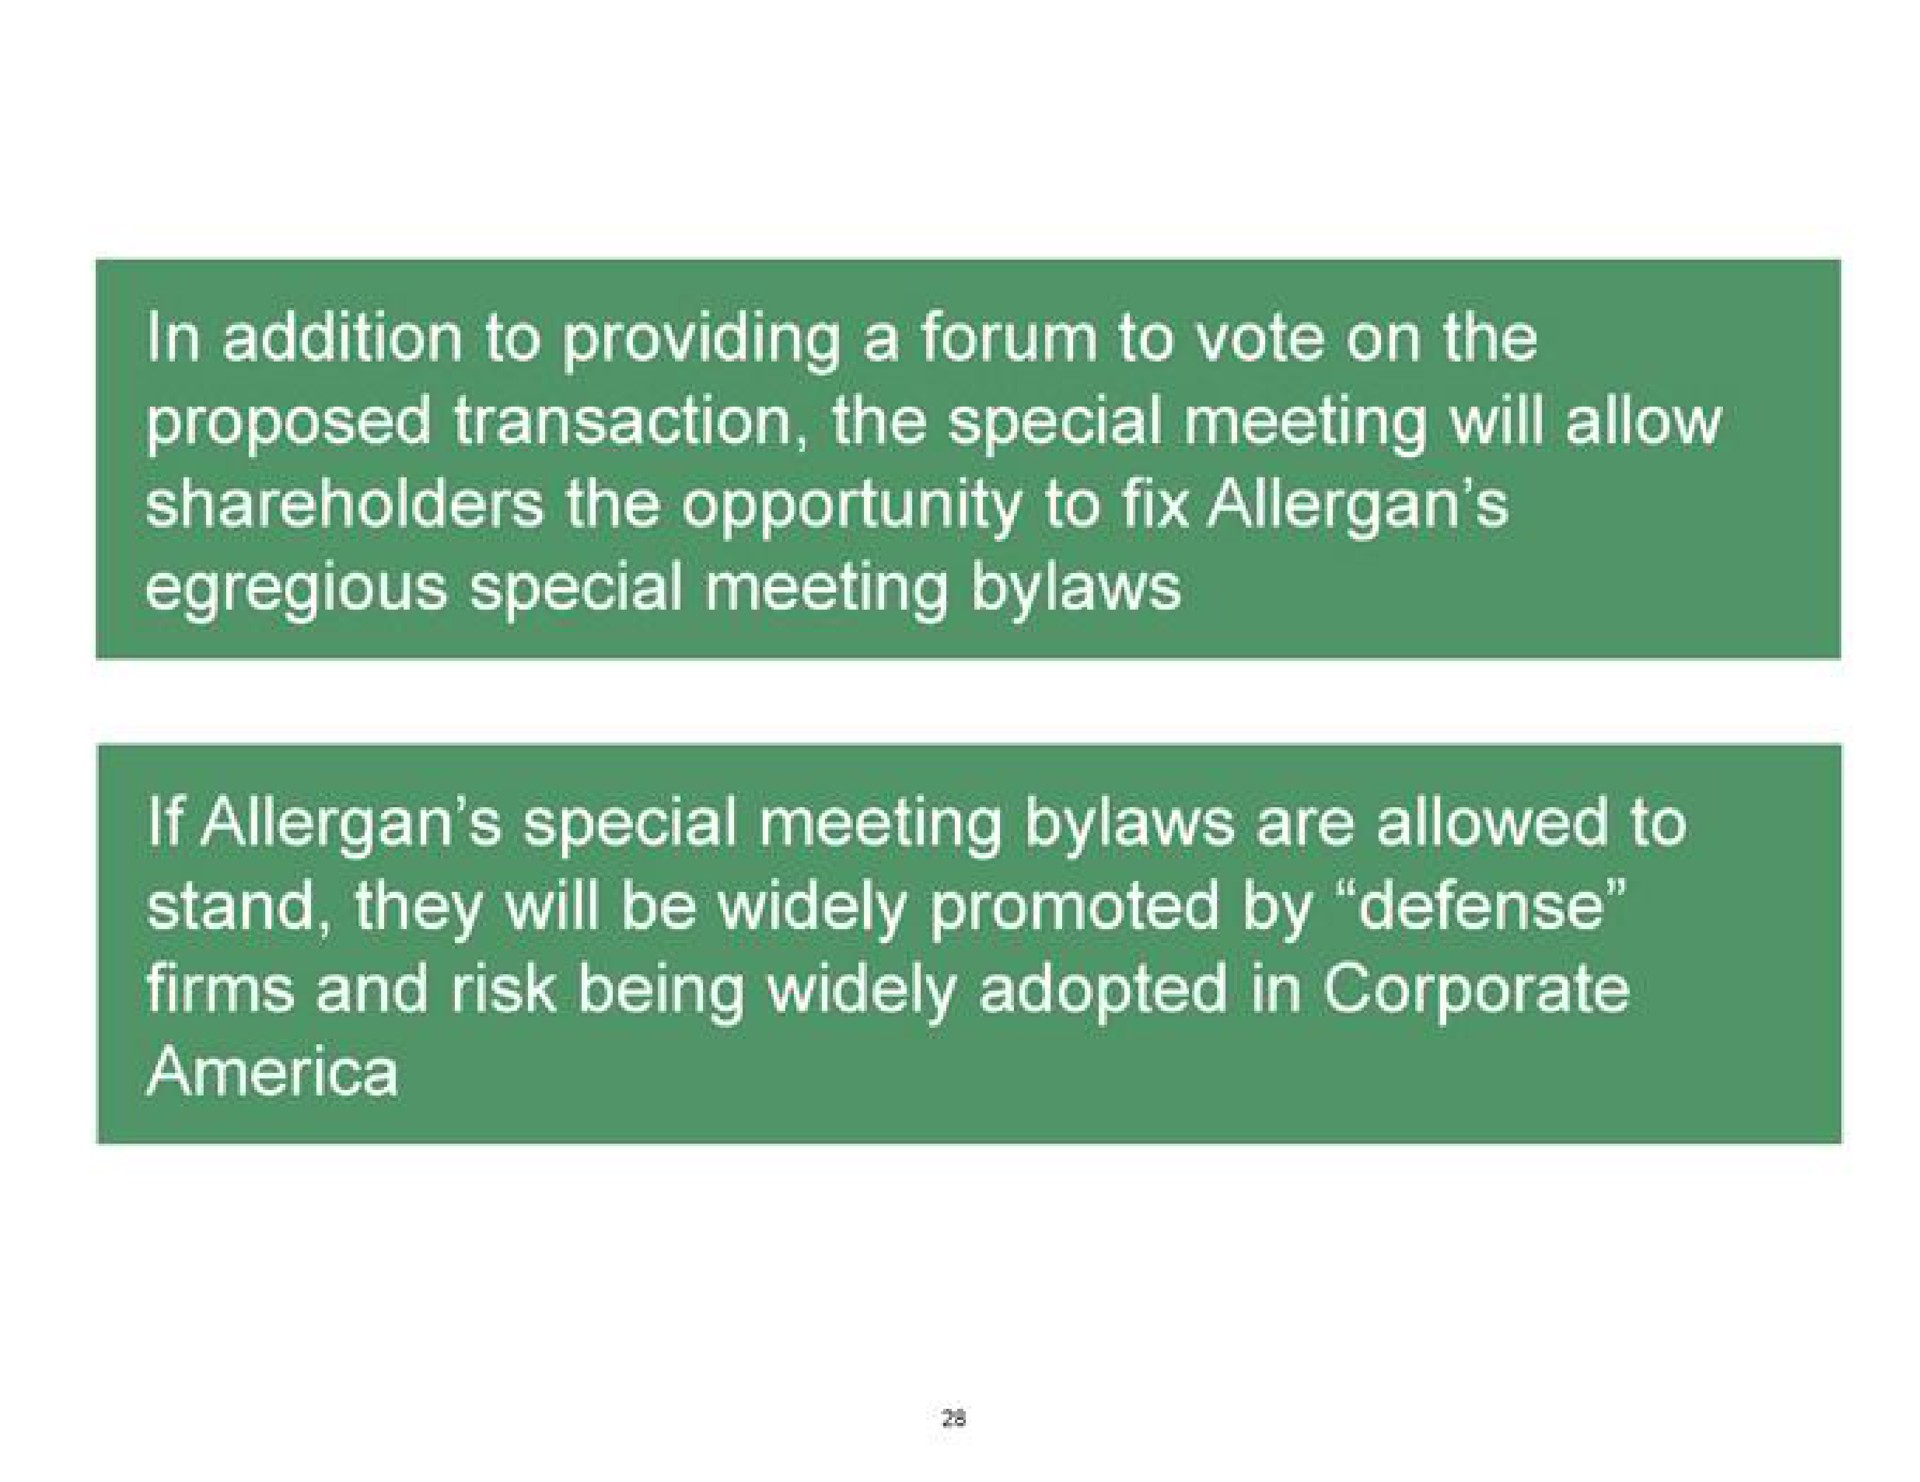 in addition to providing a forum to vote on the proposed transaction the special meeting will allow shareholders the opportunity to fix egregious special meeting bylaws special meeting bylaws are allowed to stand they will be widely promoted by defense firms and risk being widely adopted in corporate | Pershing Square